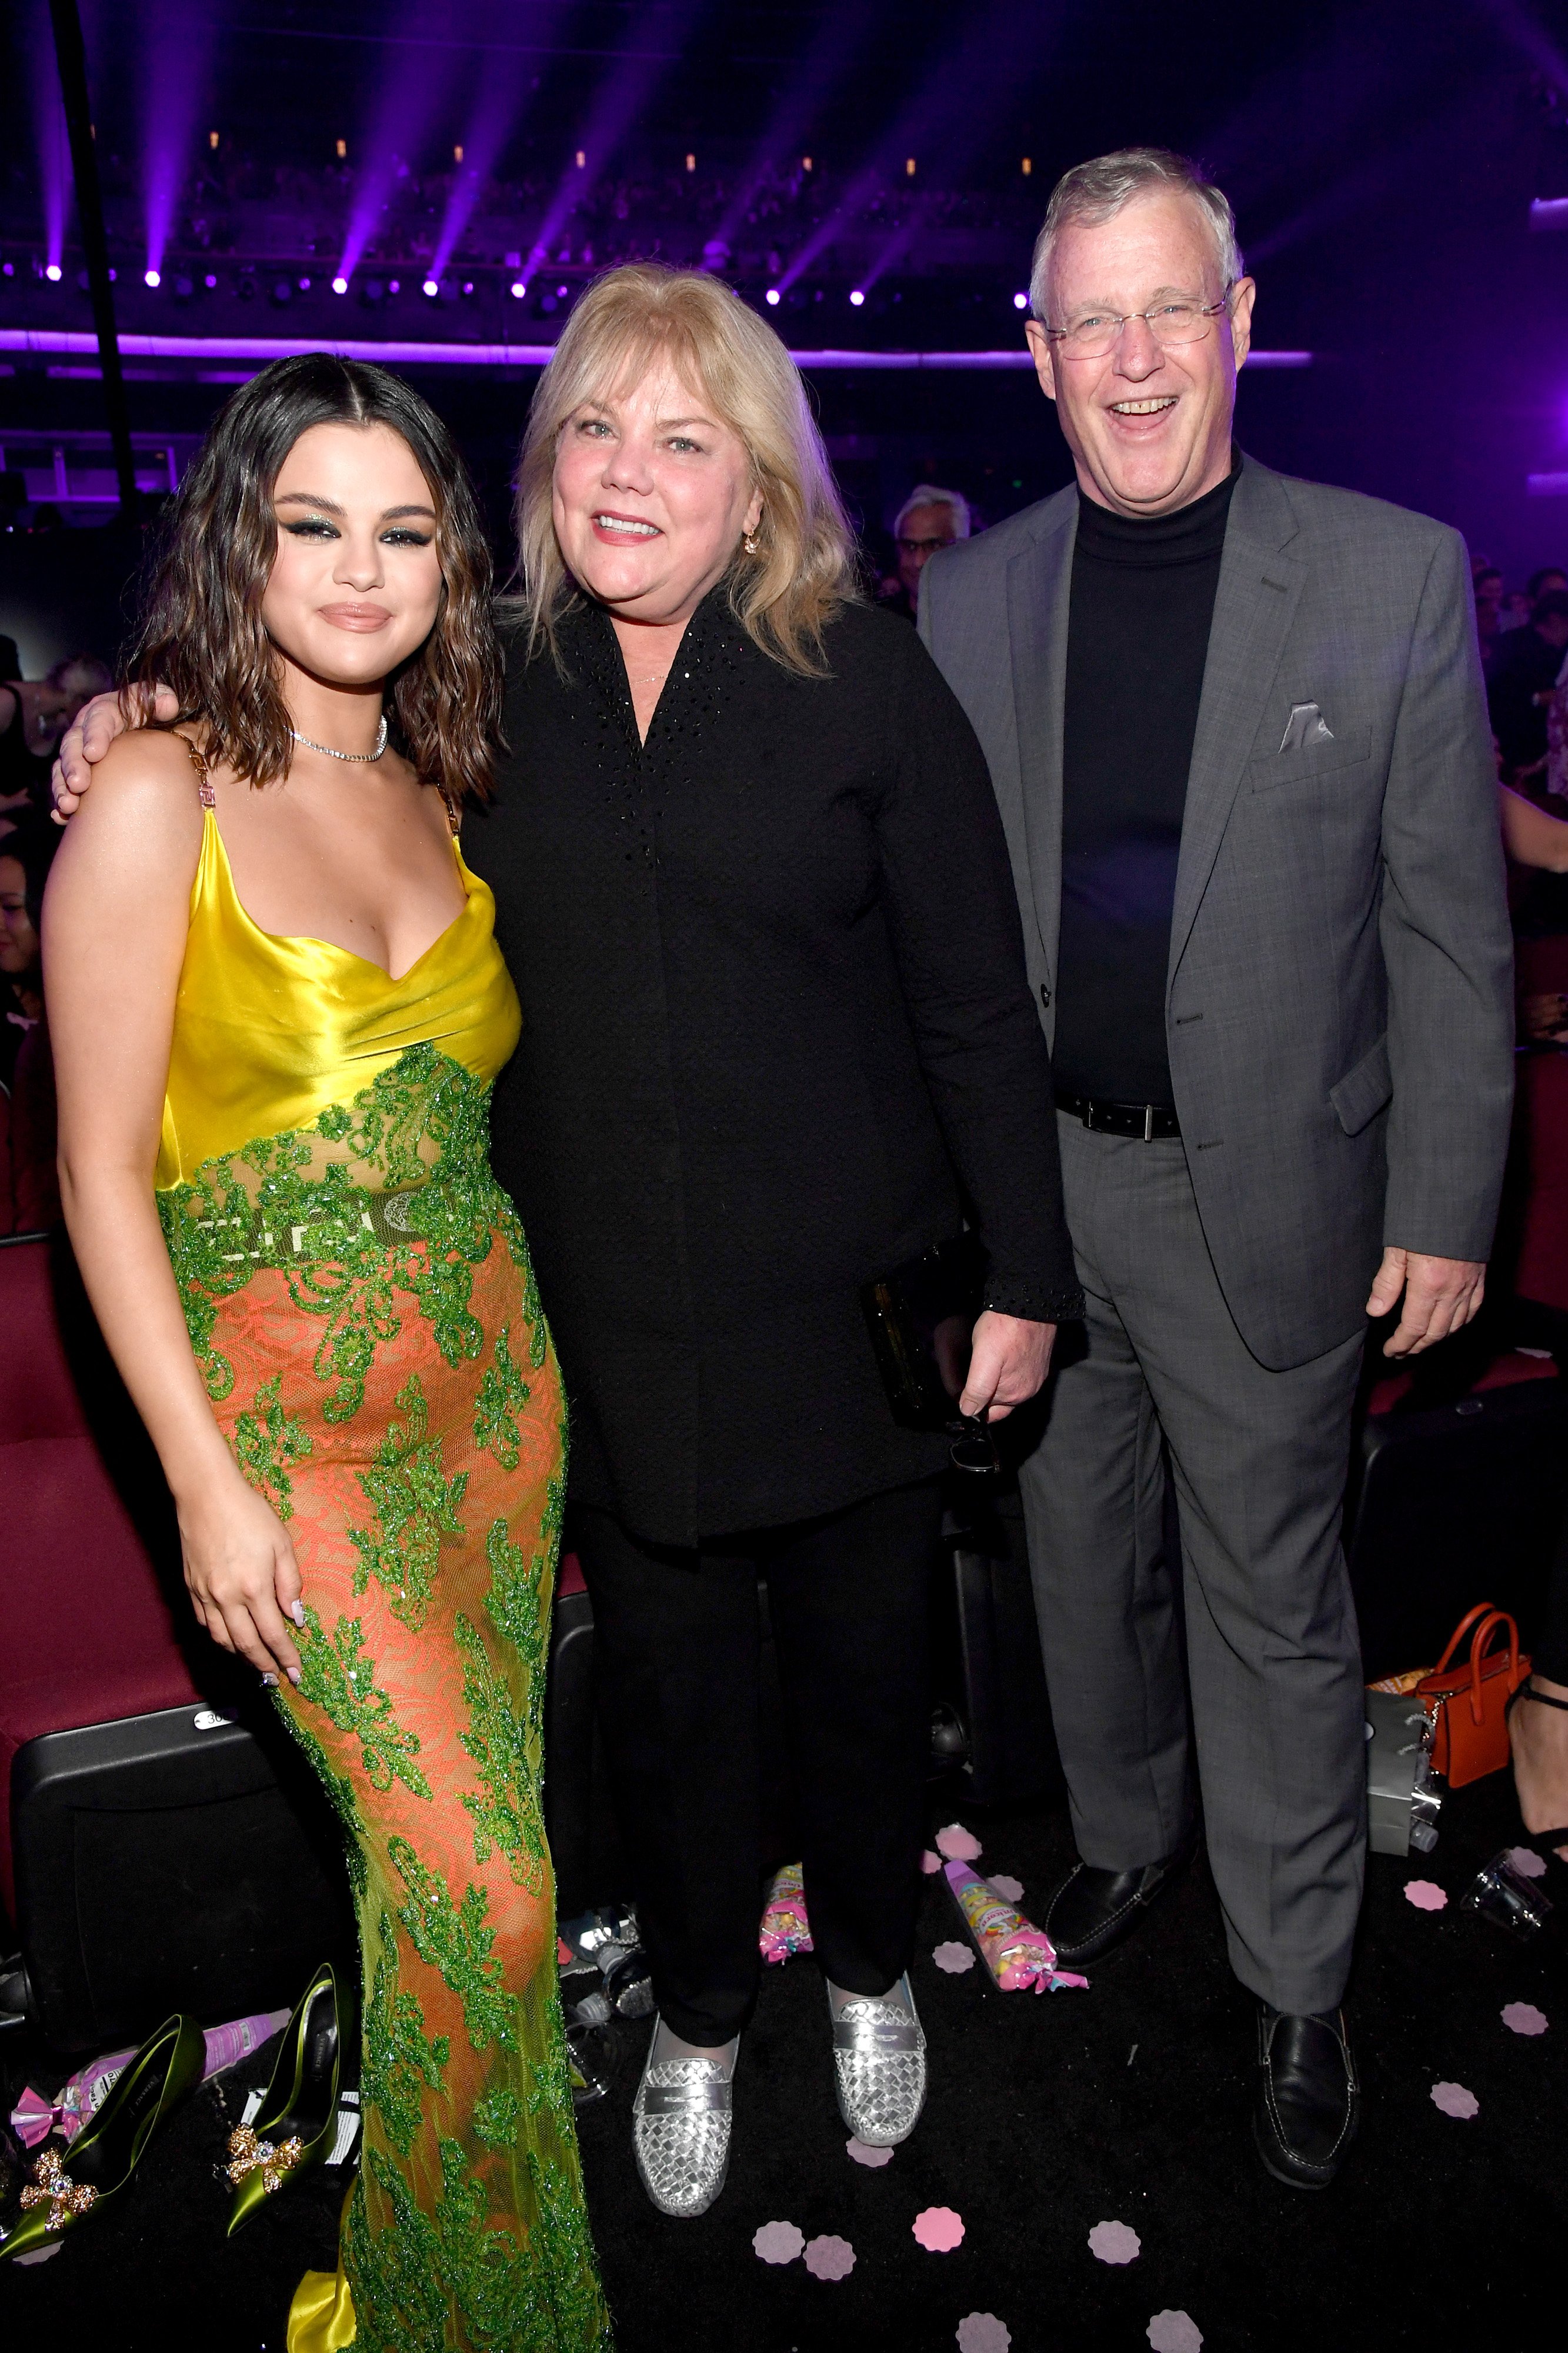 Scott and Andrea Swift posing for a picture with Selena Gomez at the 2019 American Music Awards on November 24, 2019, in California | Source: Getty Images